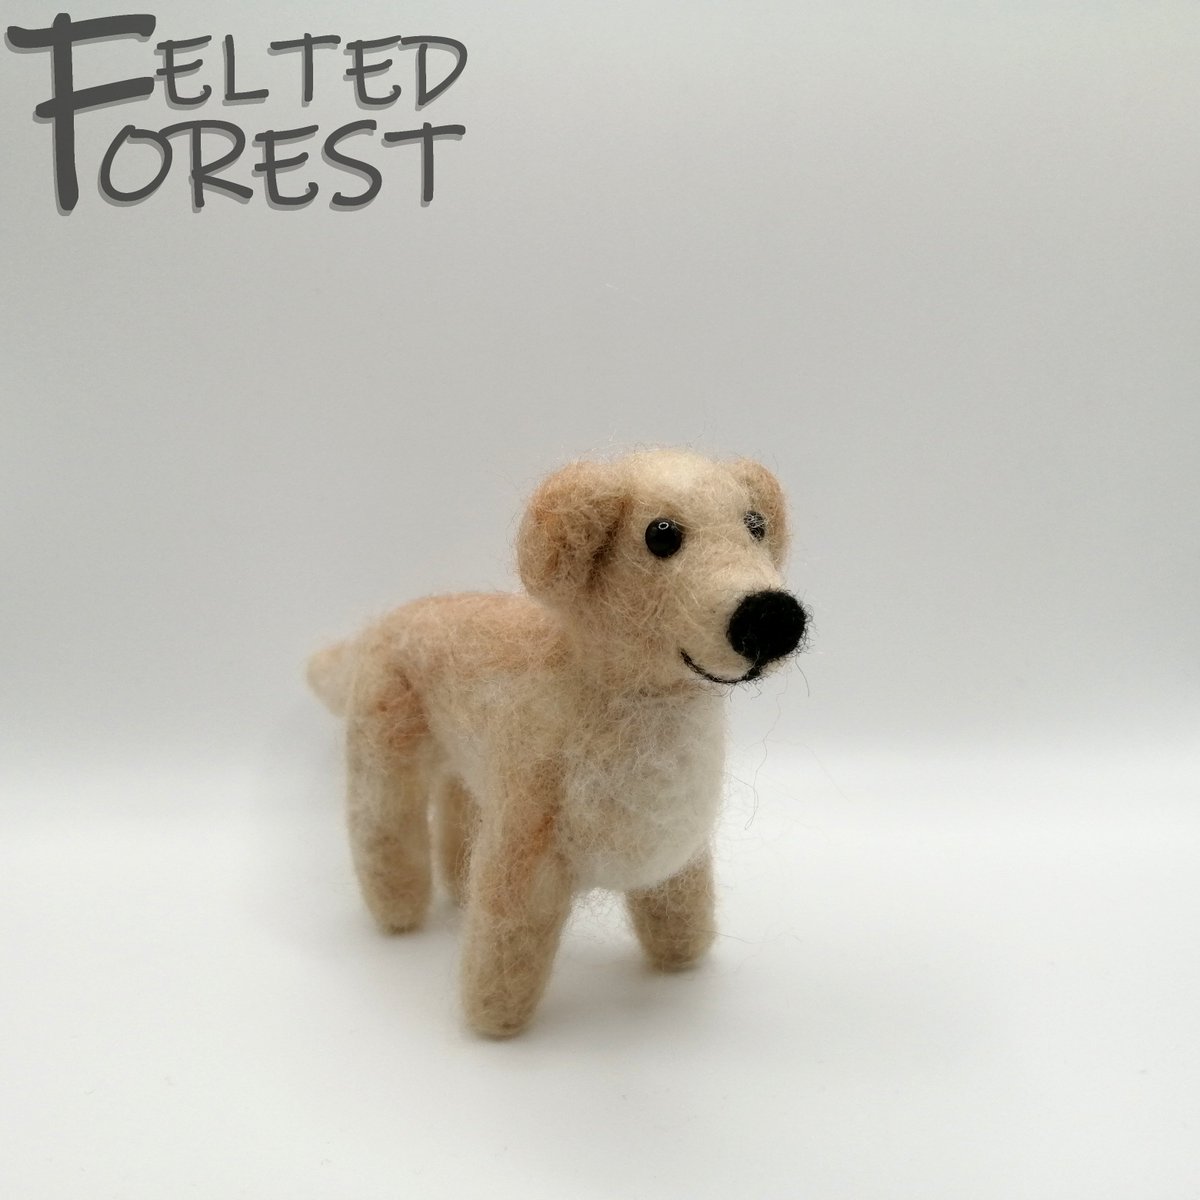 felted_forest tweet picture